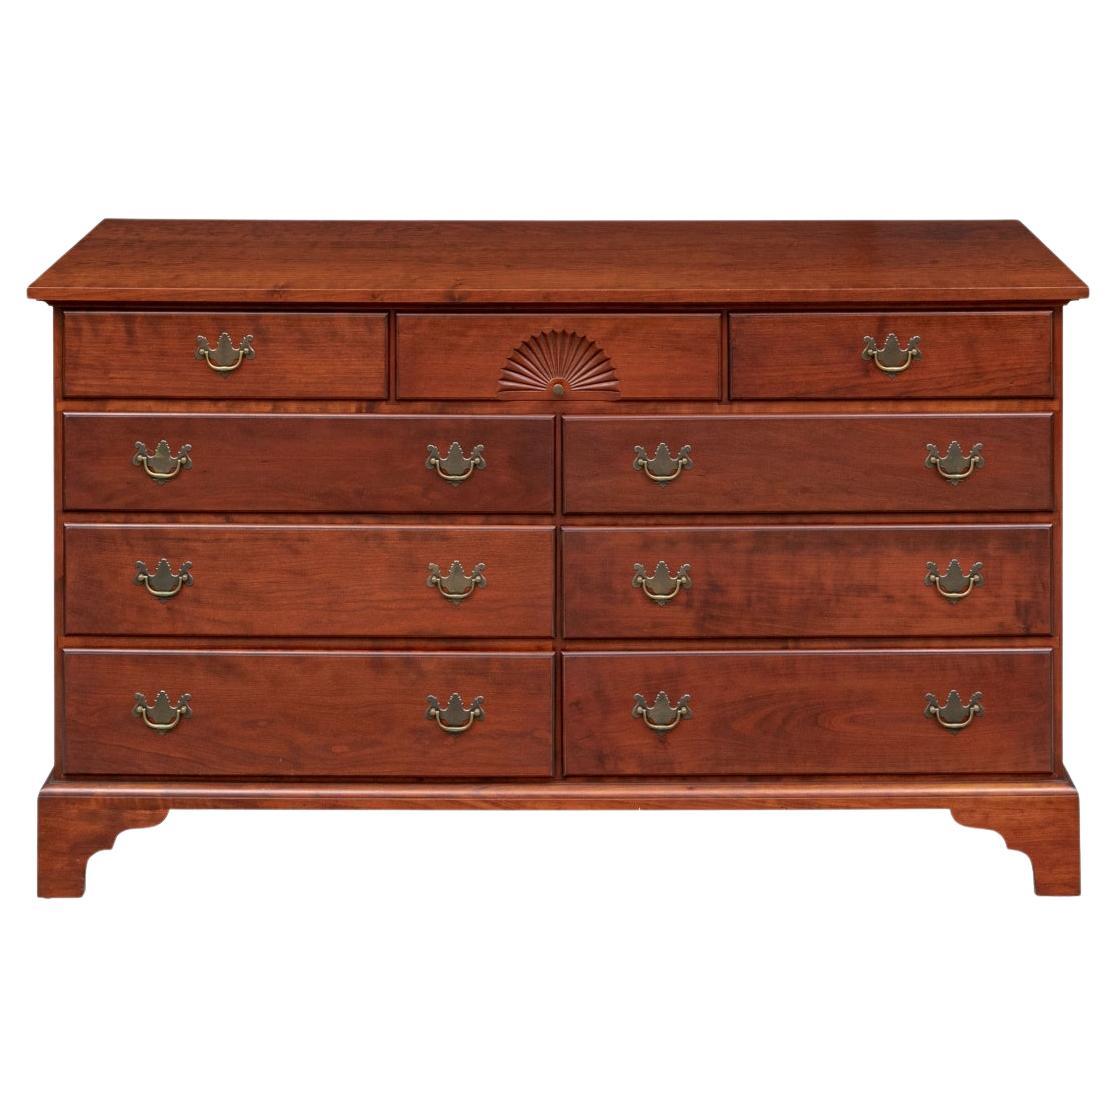 Eldred Wheeler 18th C. Style Chest of Drawers